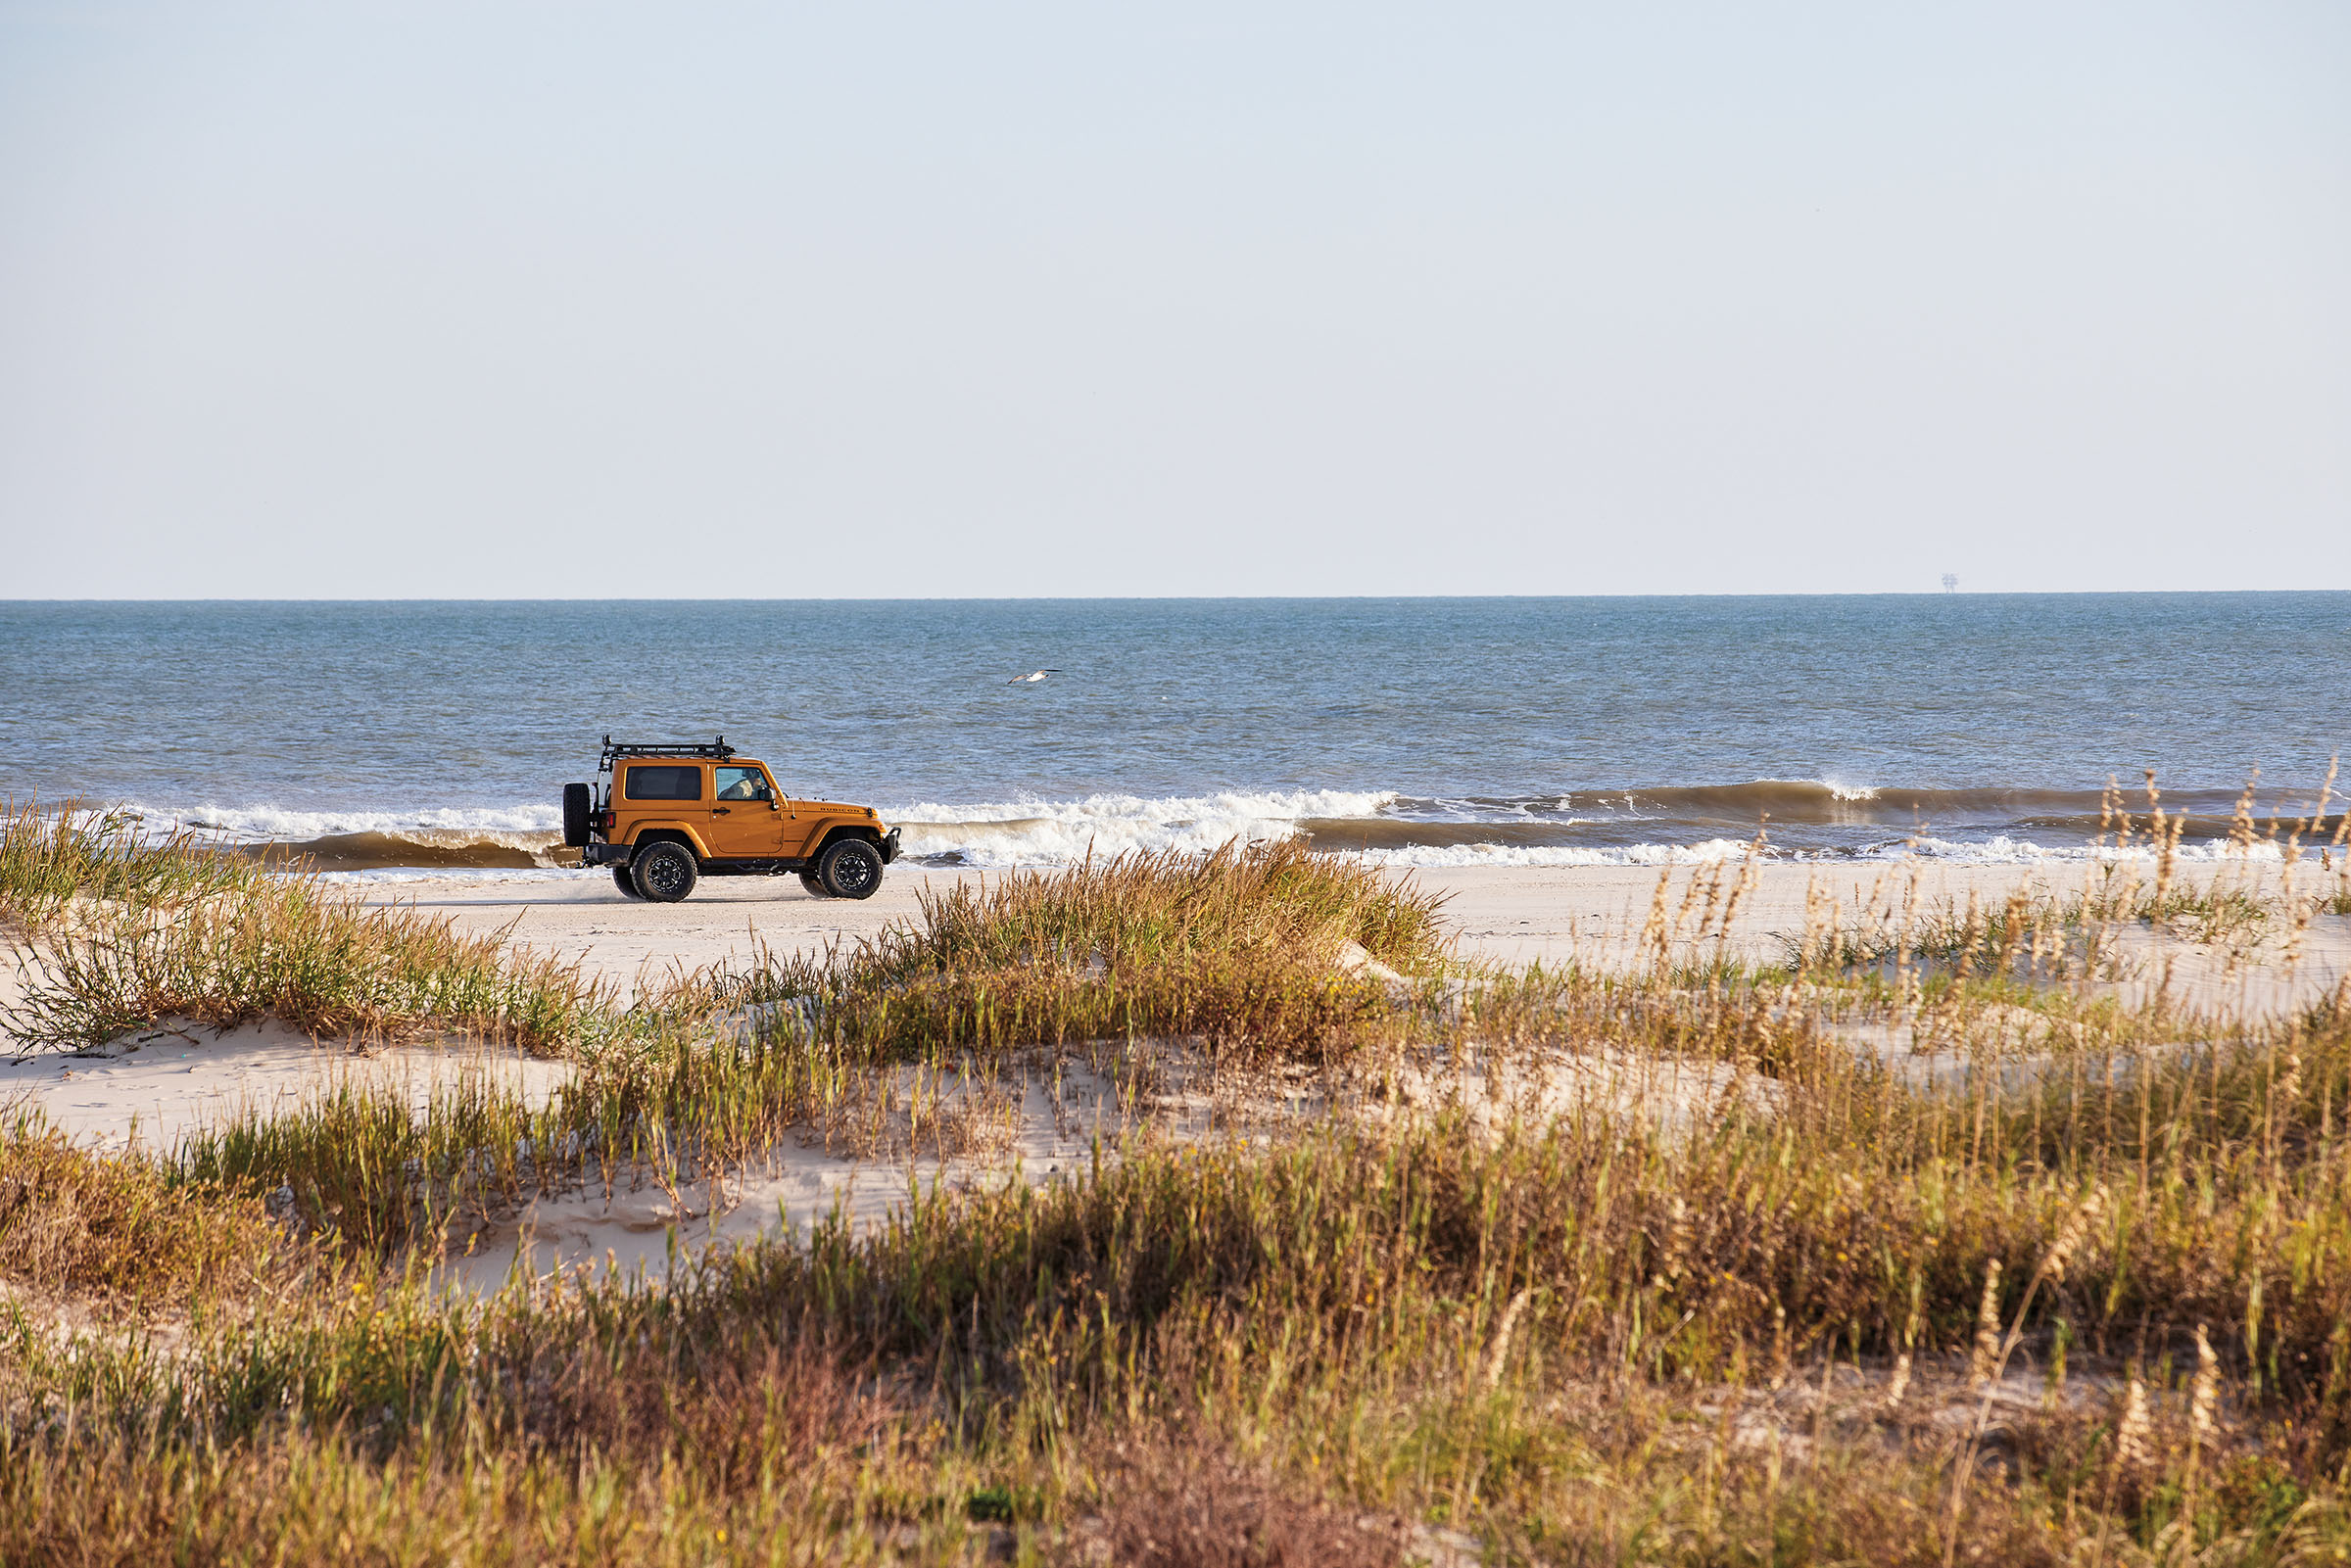 An orange jeep drives across a grassy, sandy beach in front of water